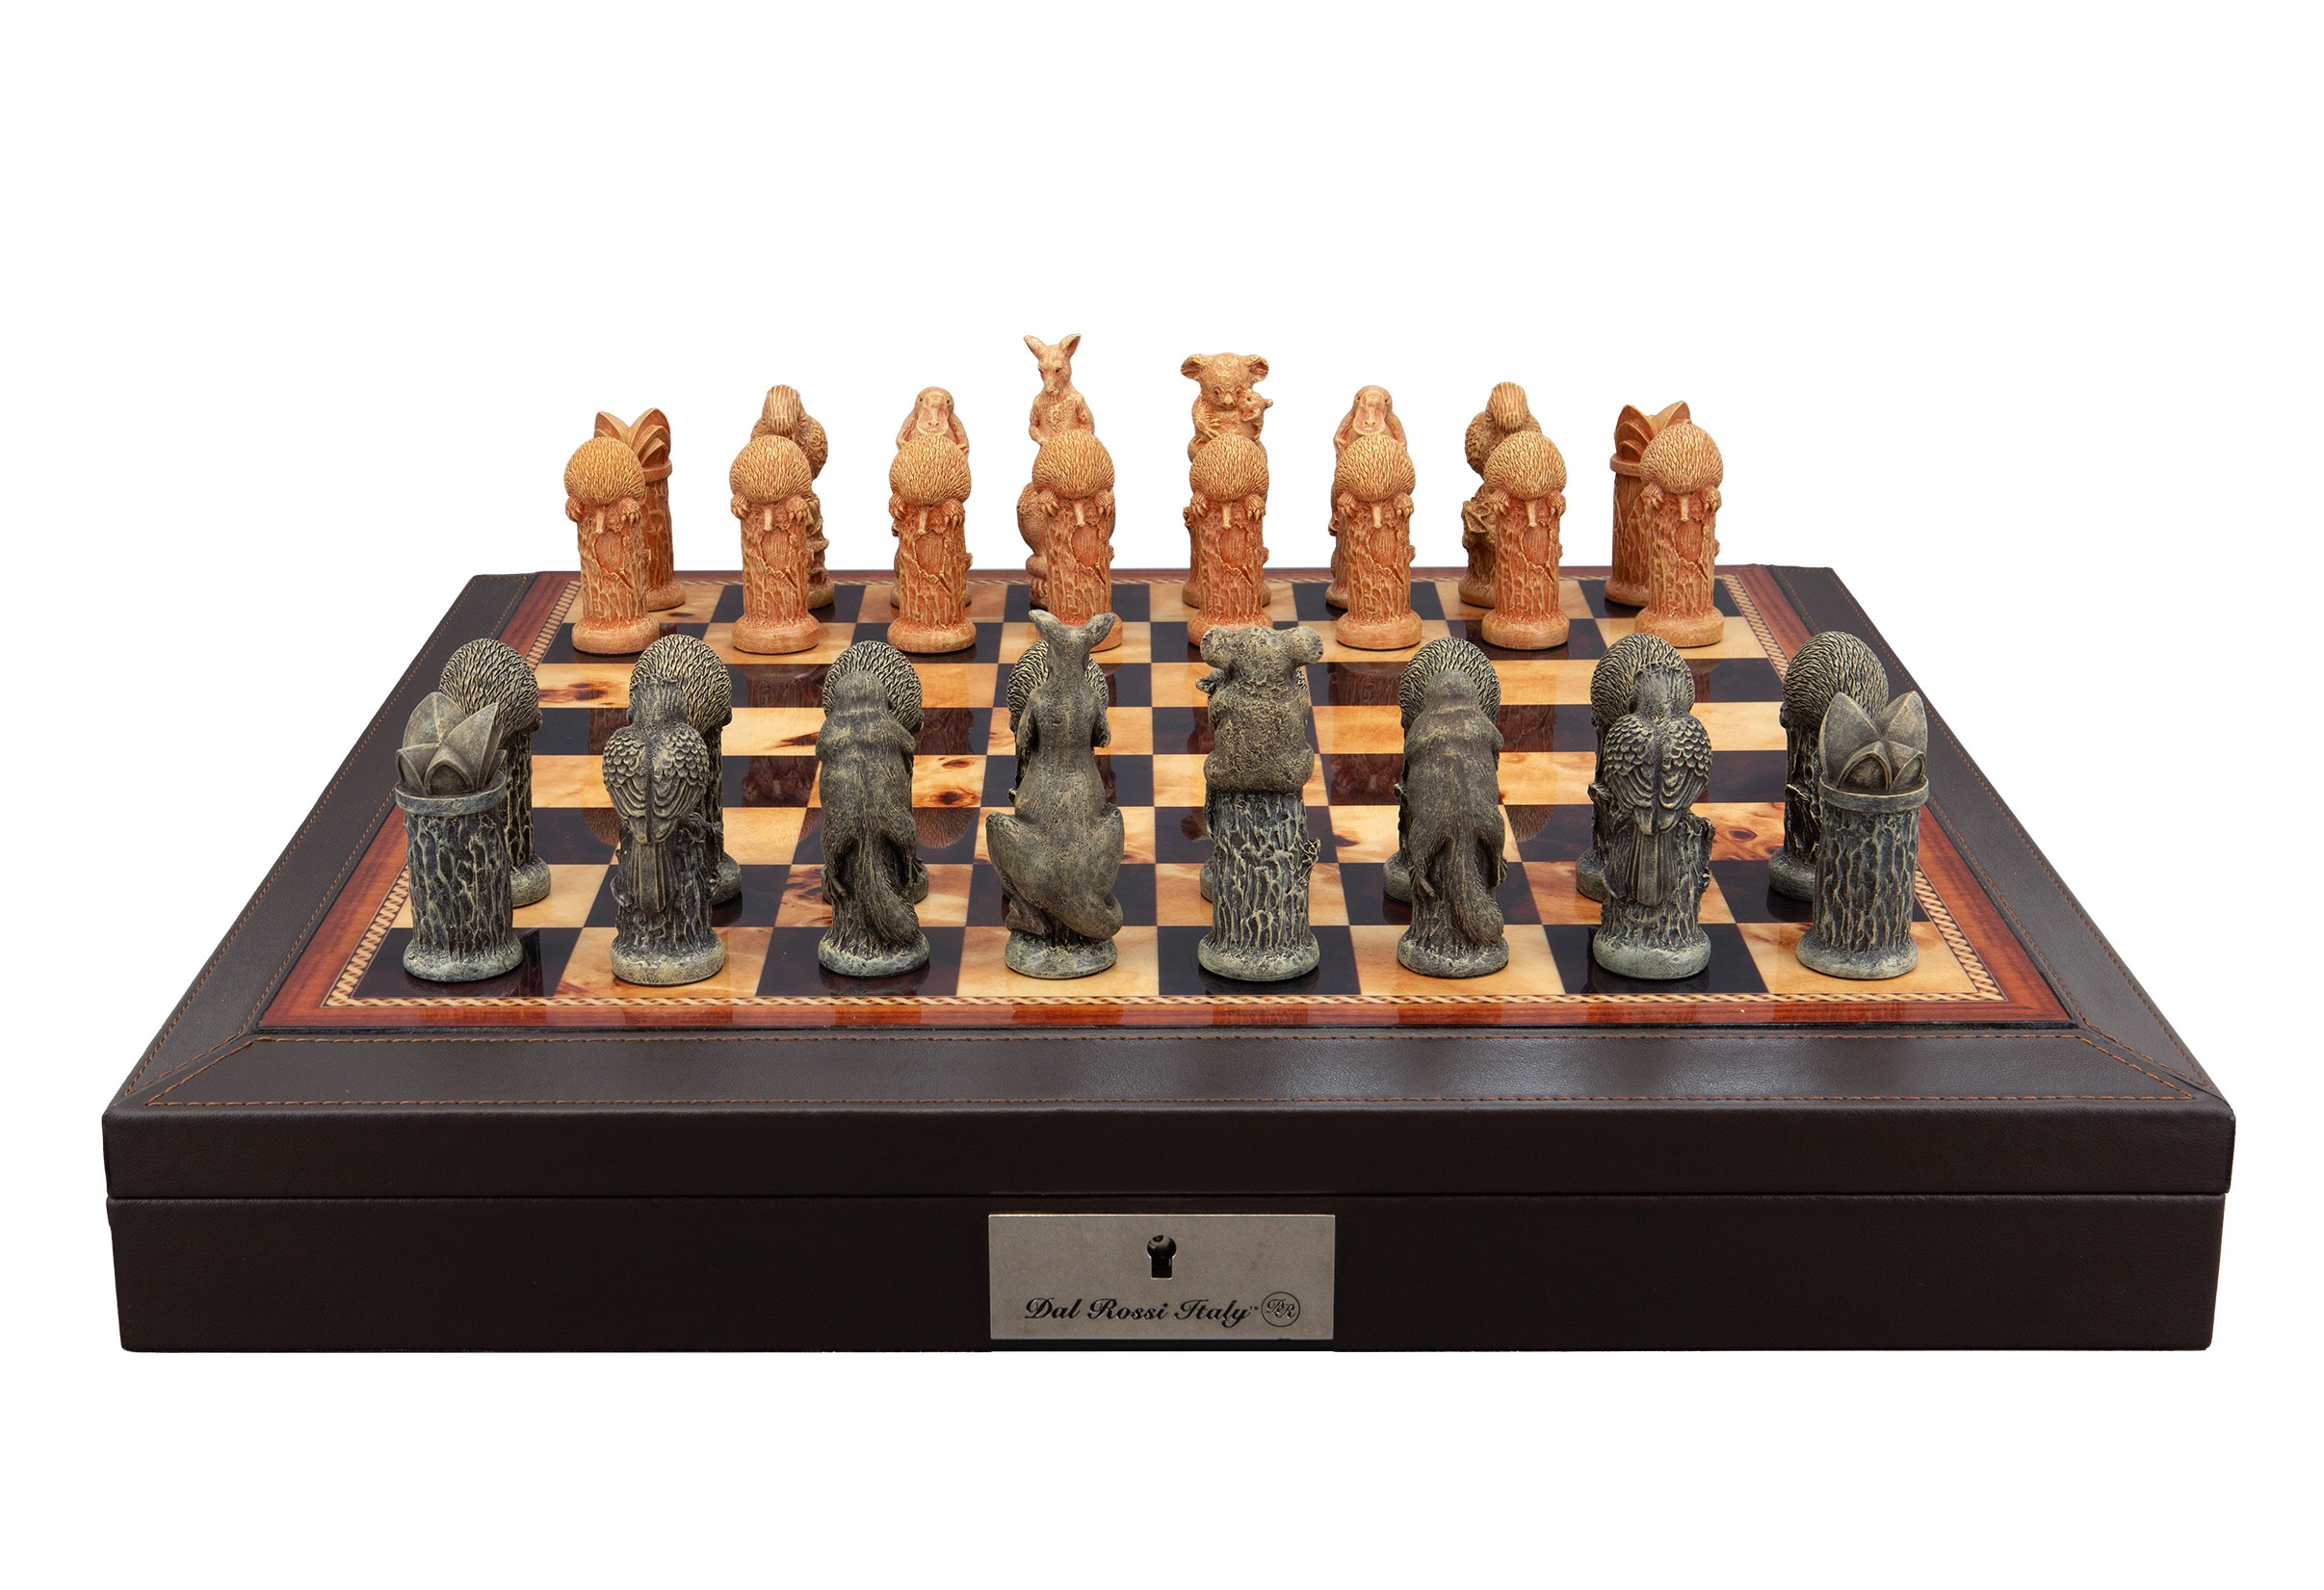 Dal Rossi Hand Paint - Australiana Chessmen on a Brown PU Leather Bevelled Edge chess box with compartments 18"